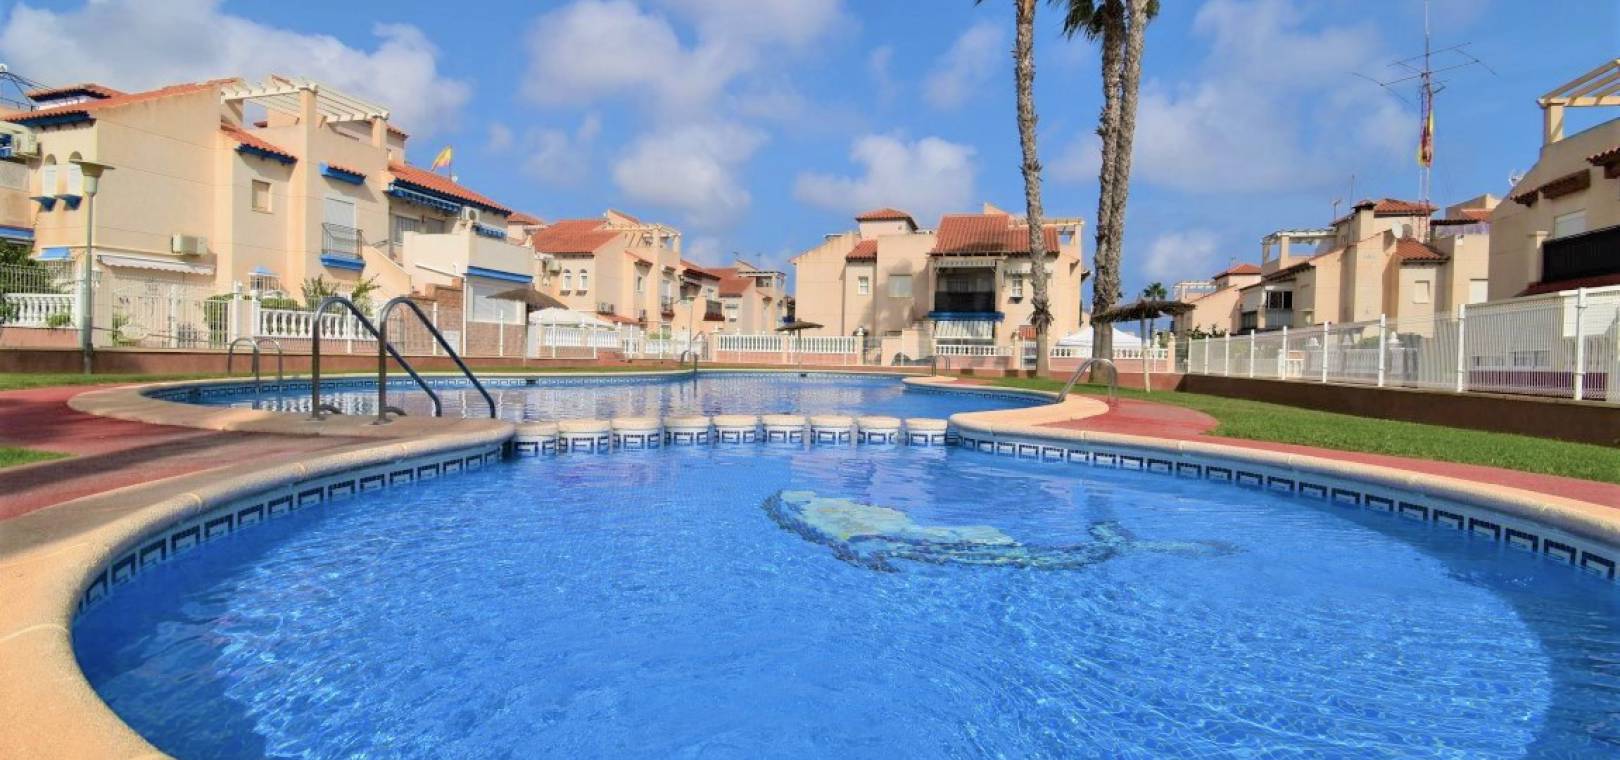 Resale, Apartment property for sale Costa Blanca South,